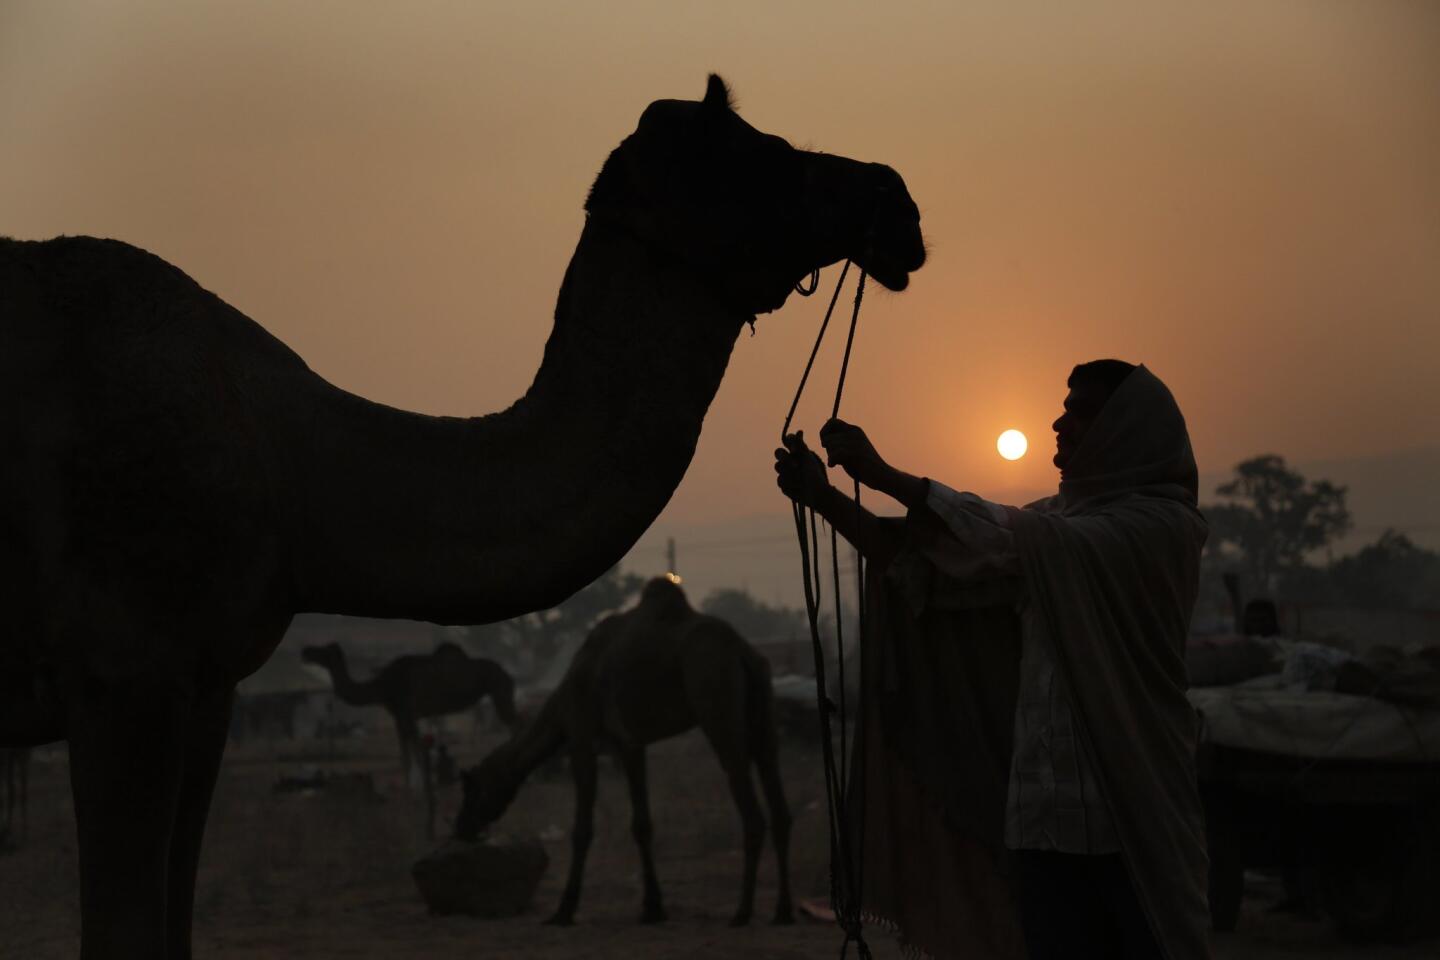 Pictures in the News | Pushkar, India